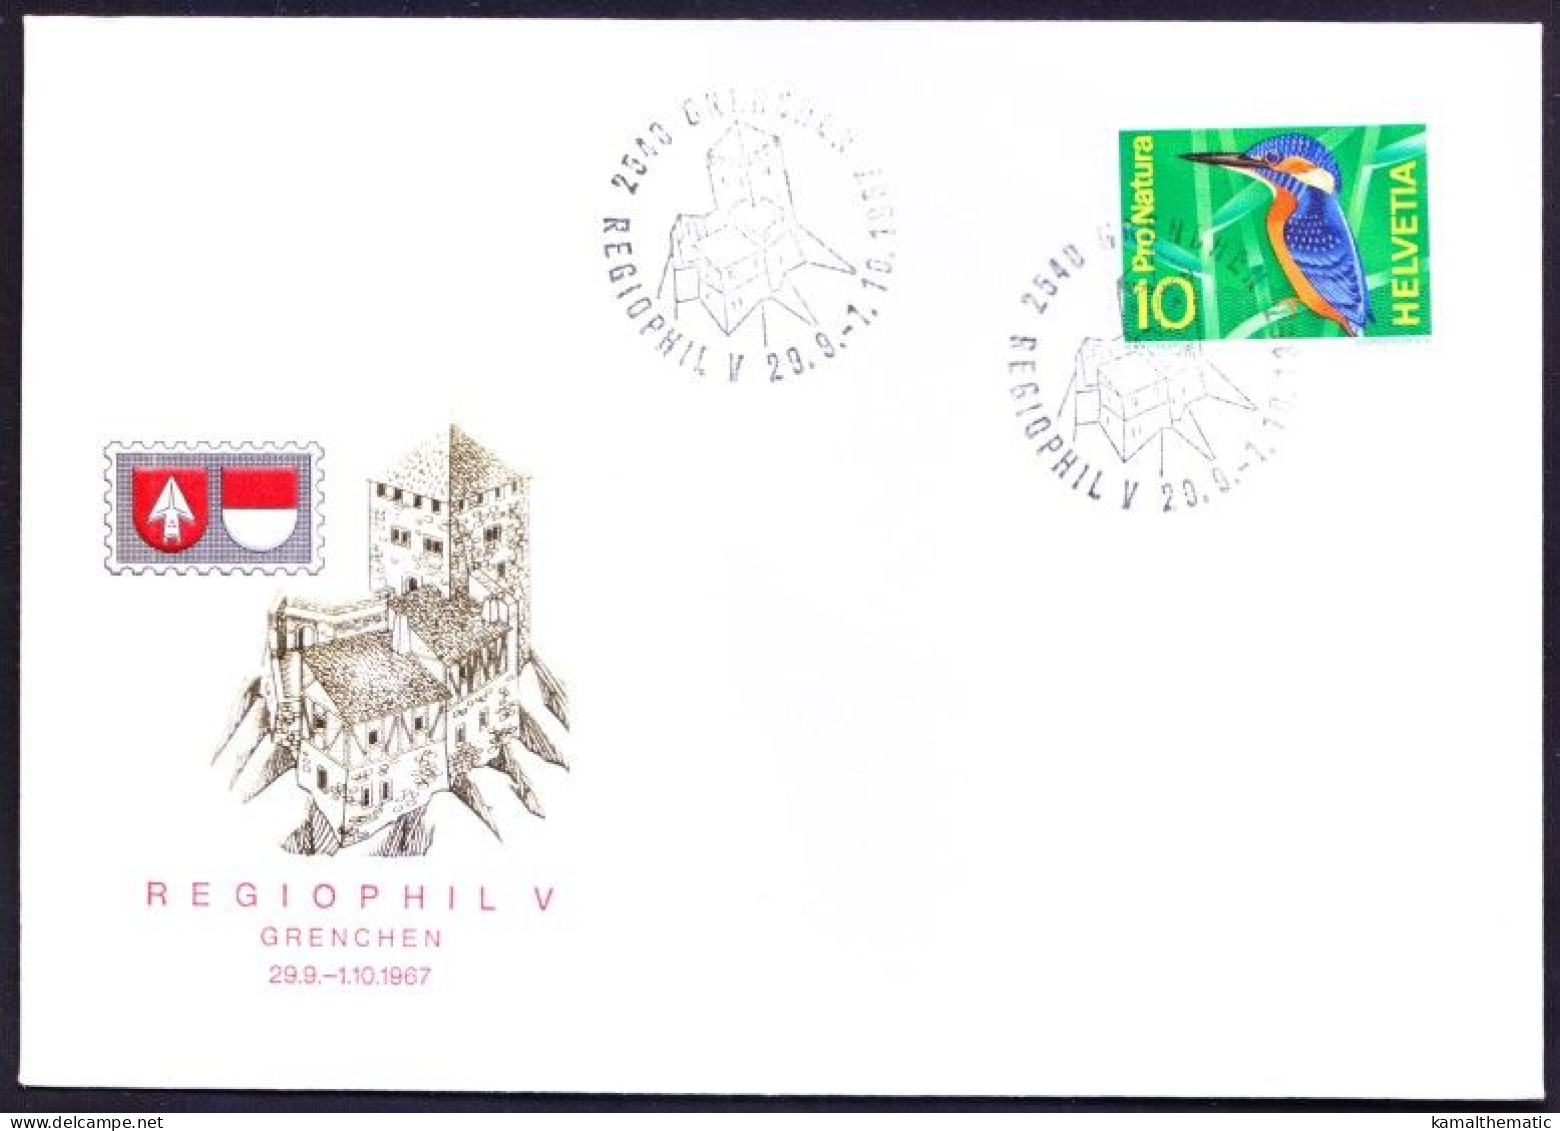 Switzerland 1967 Grenchen Cancel Cover, Common Kingfisher, Birds - Coucous, Touracos